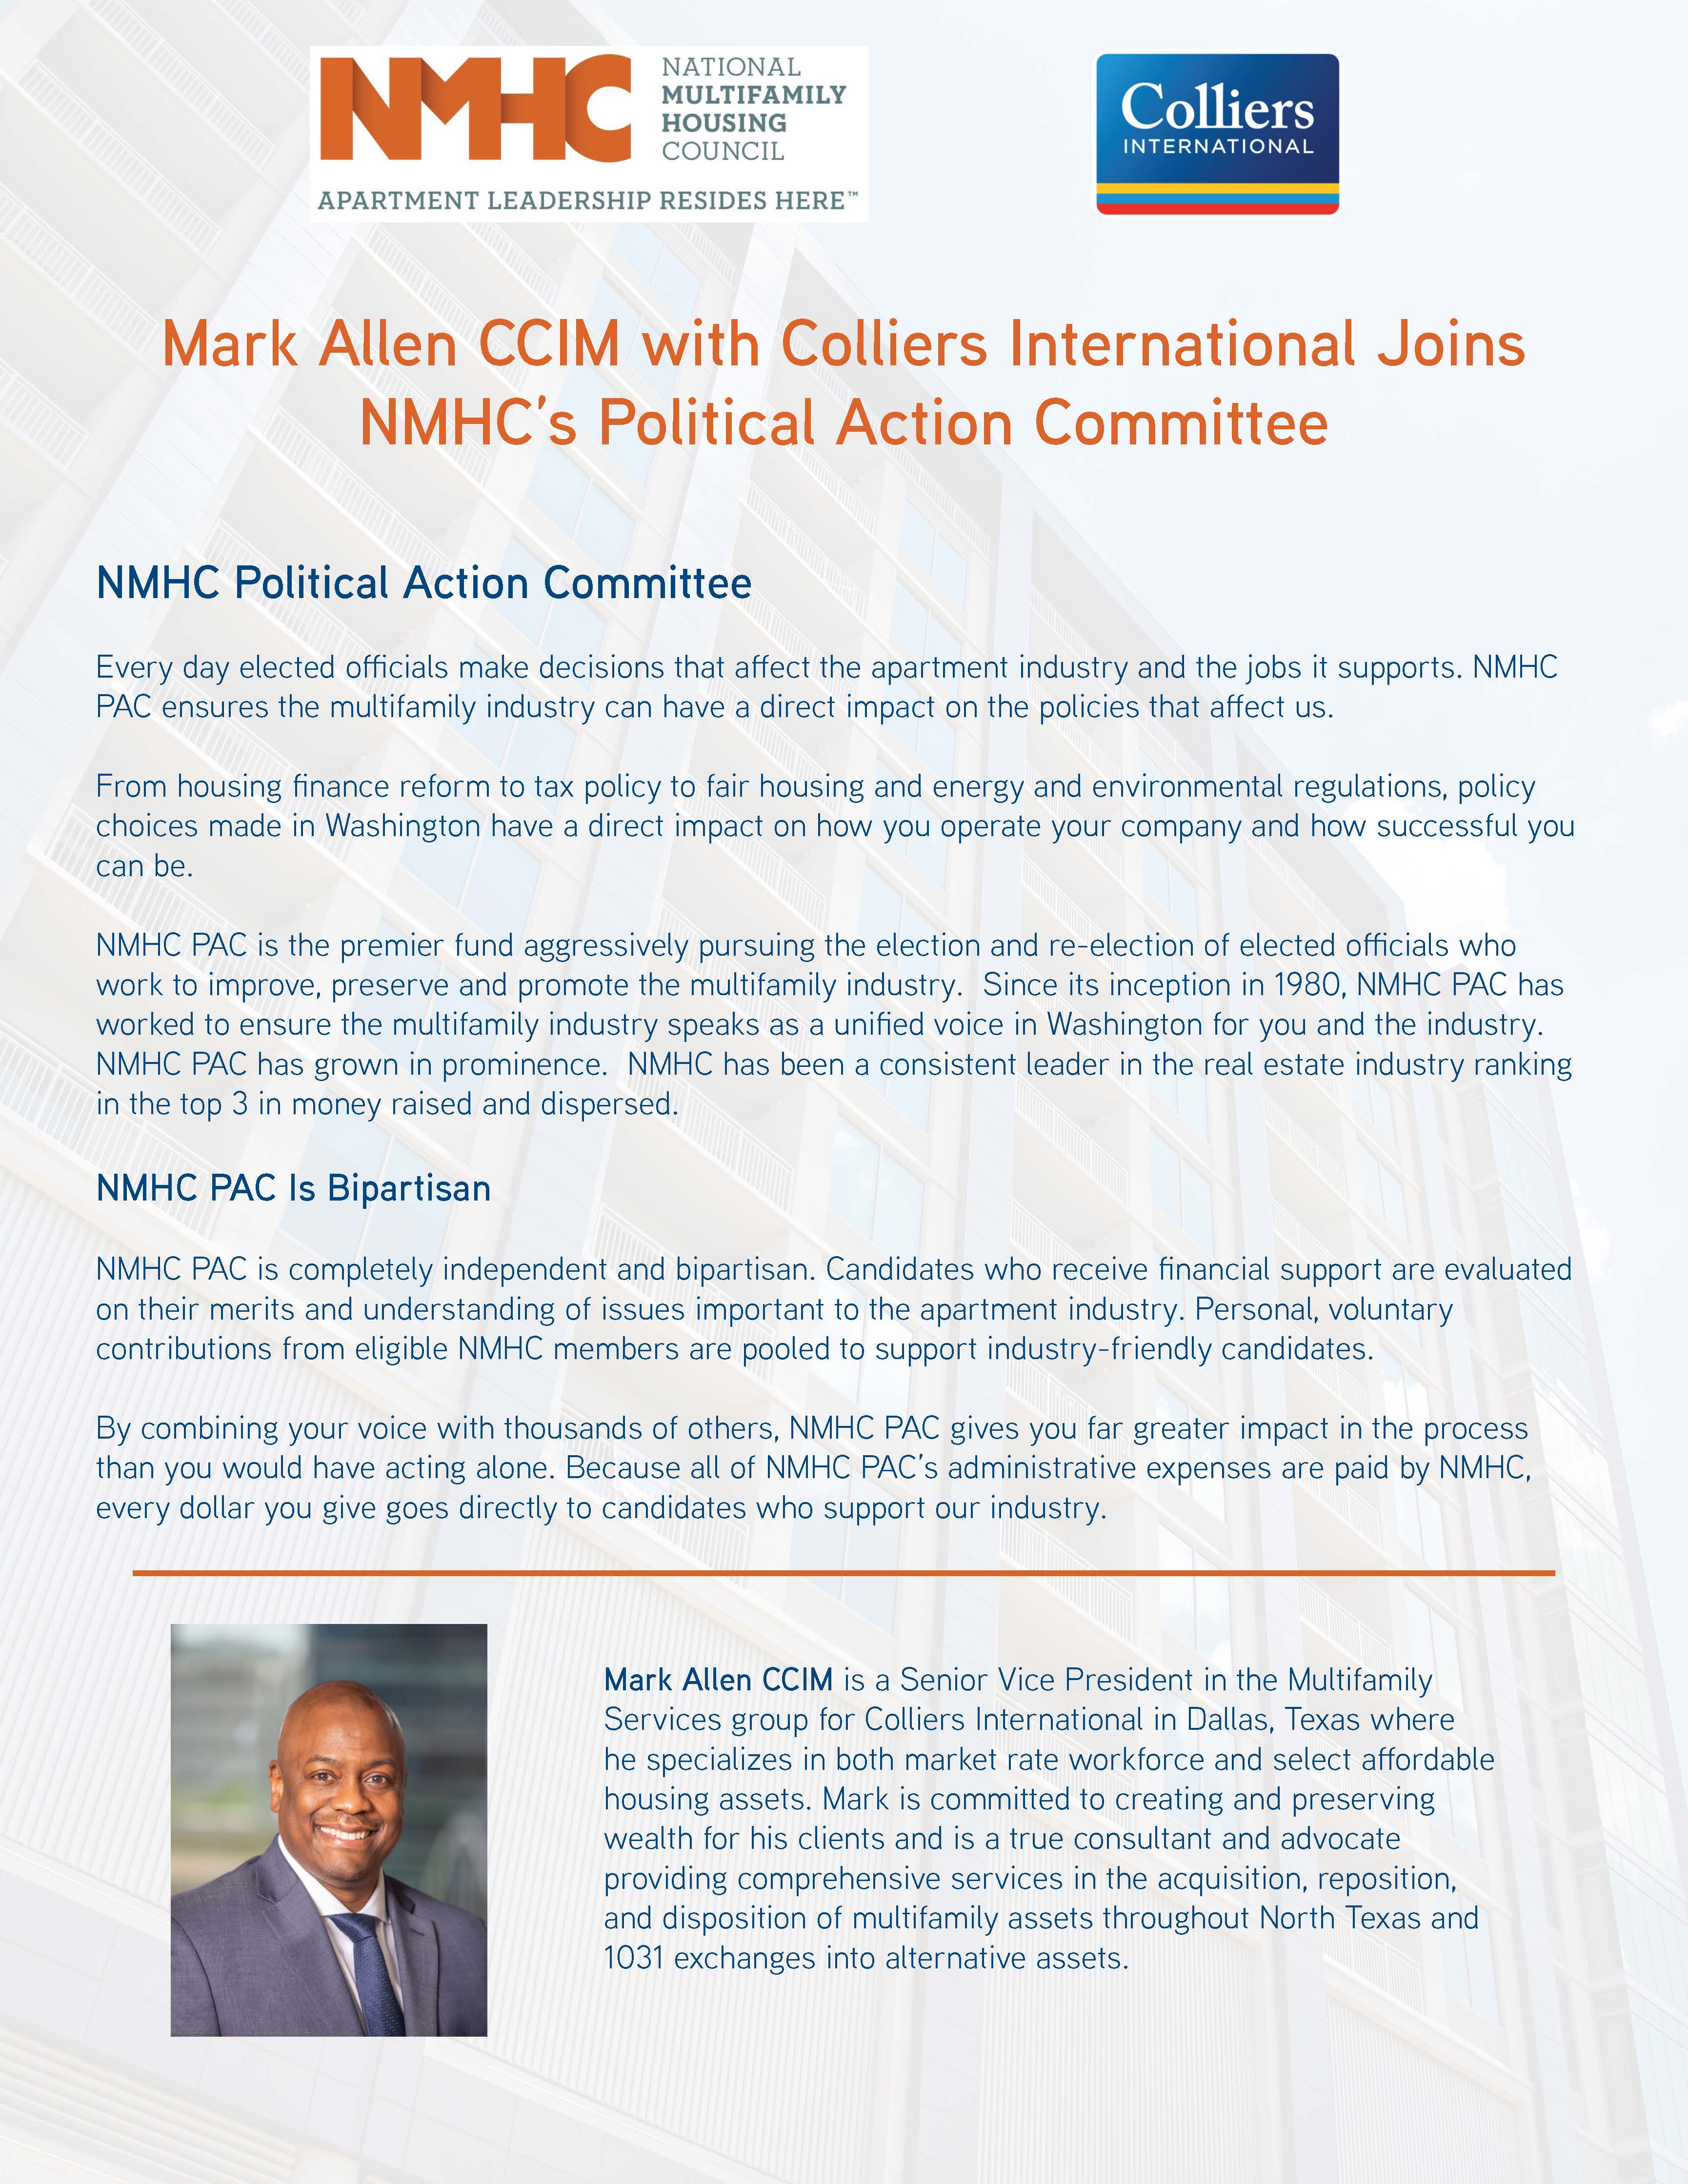 Mark Allen CCIM Joins NMHC Political Action Committee